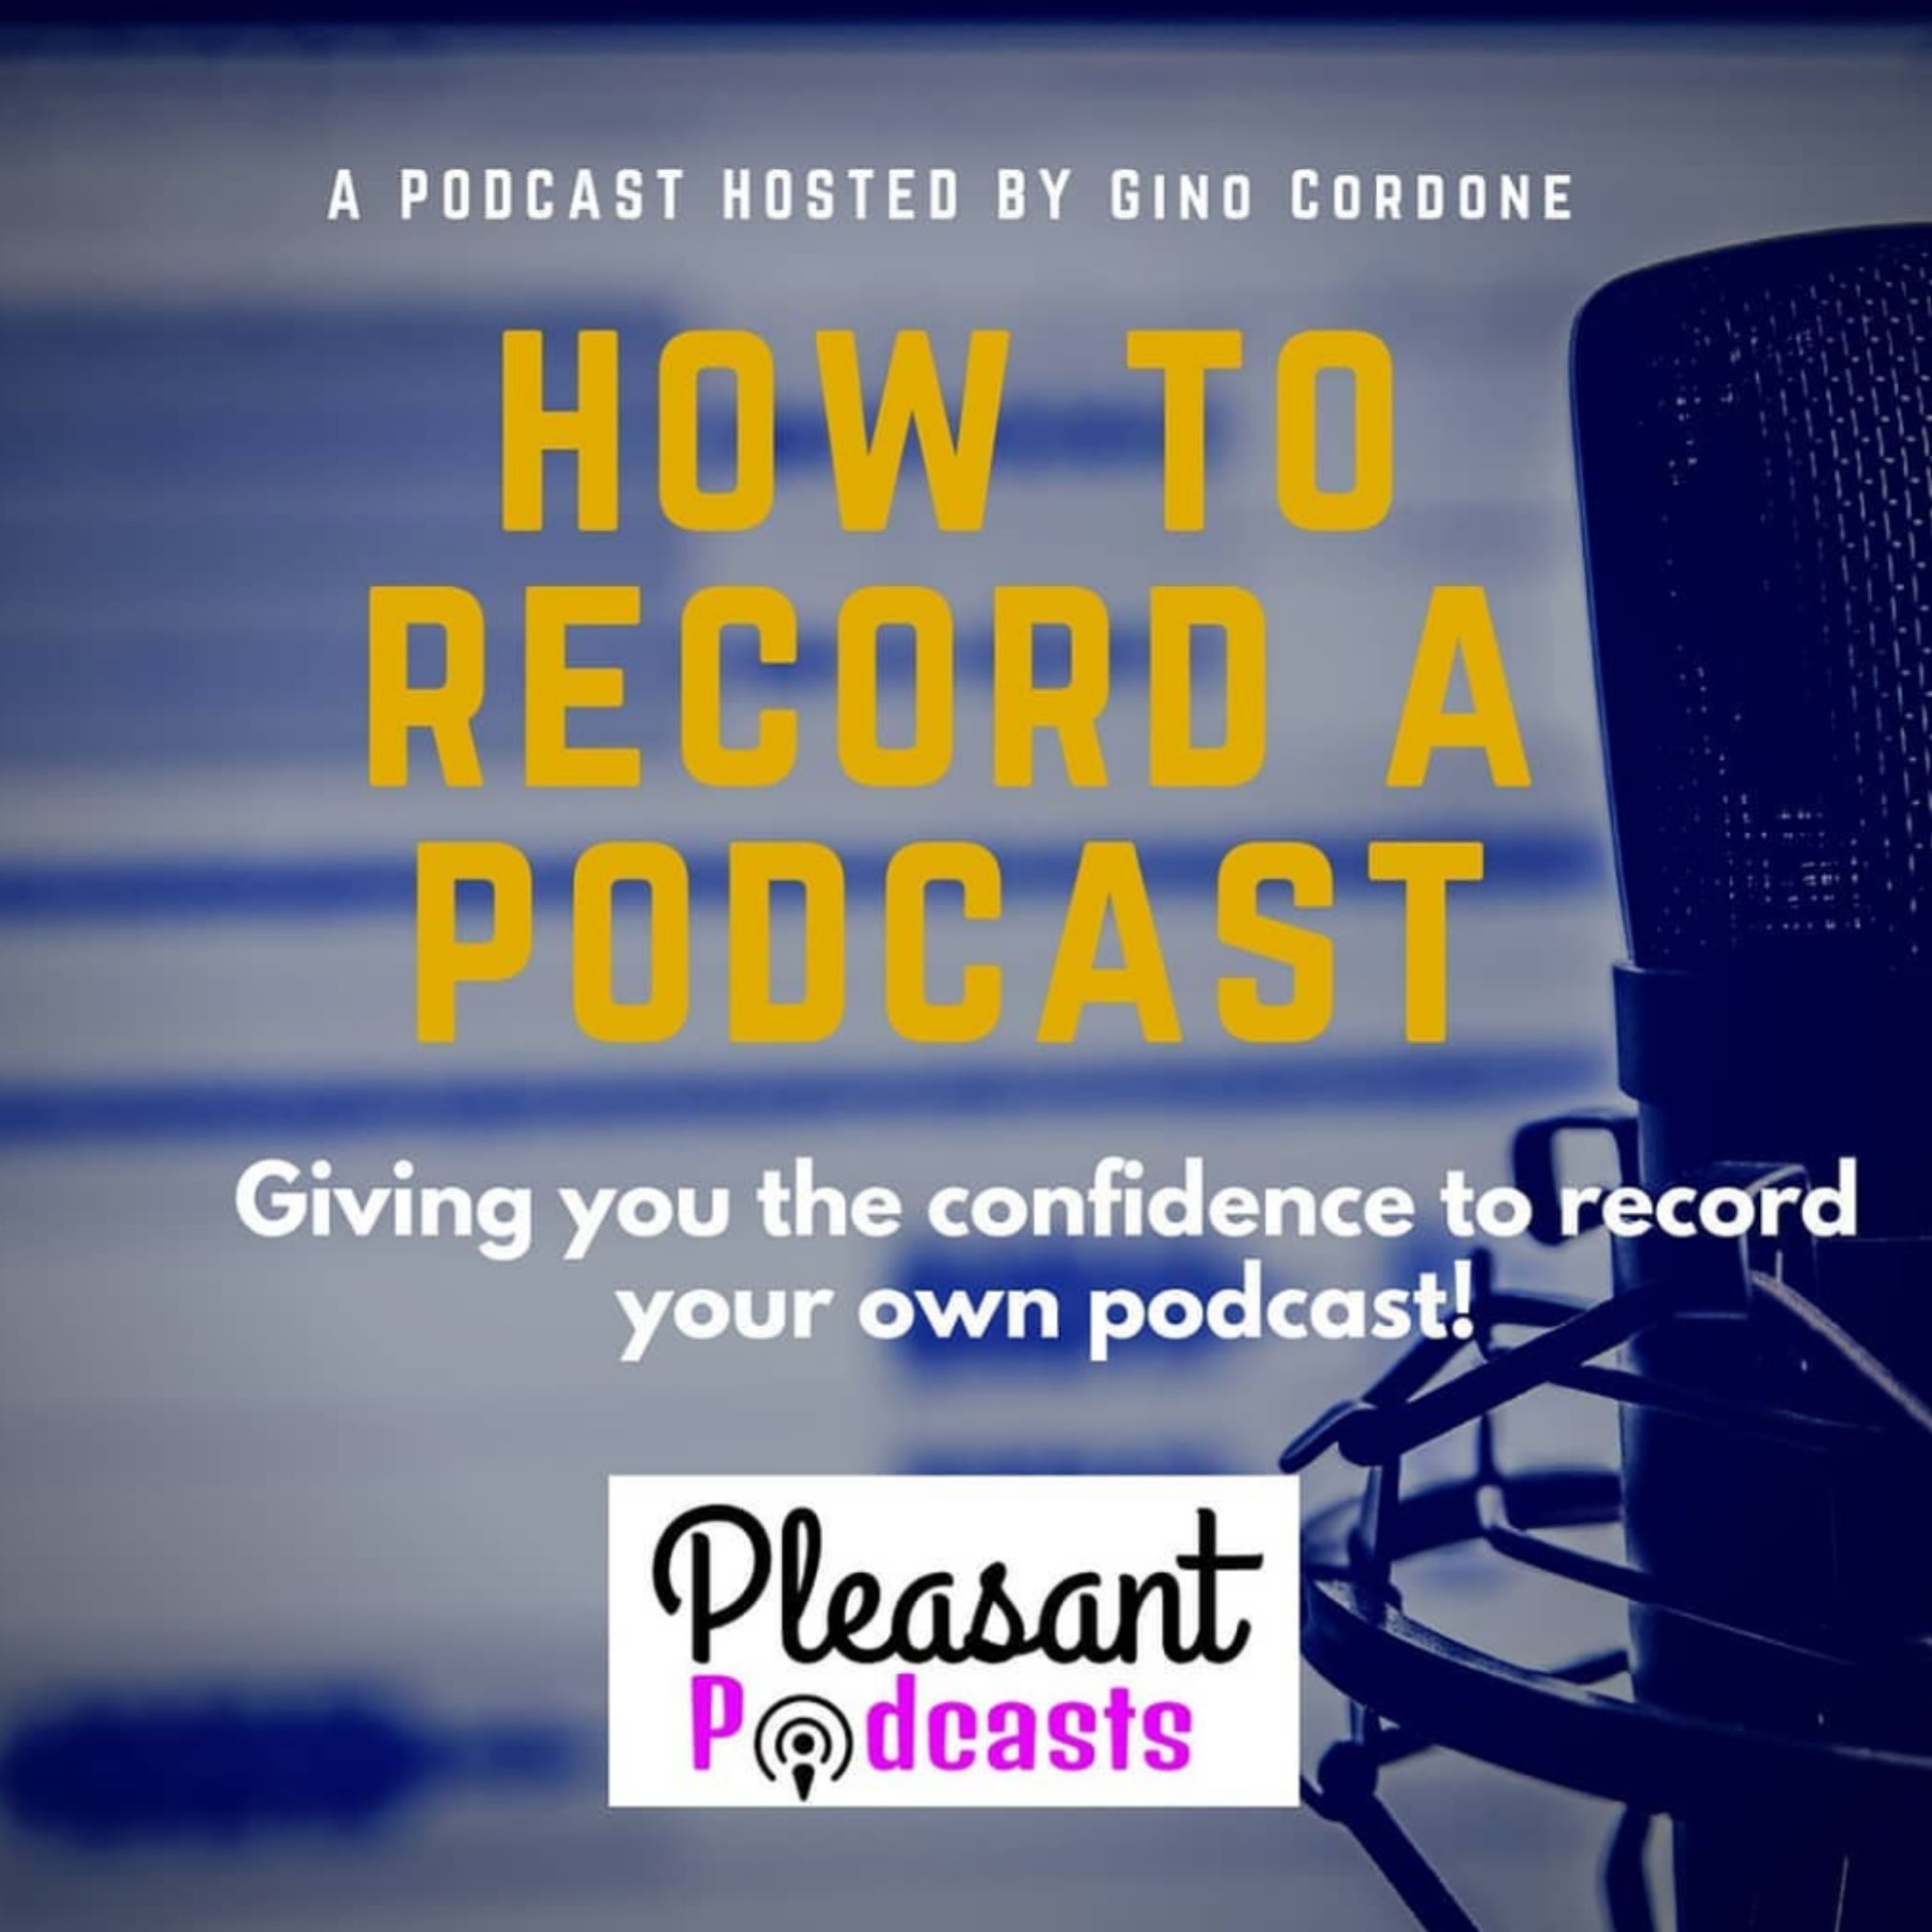 How To Record A Podcast